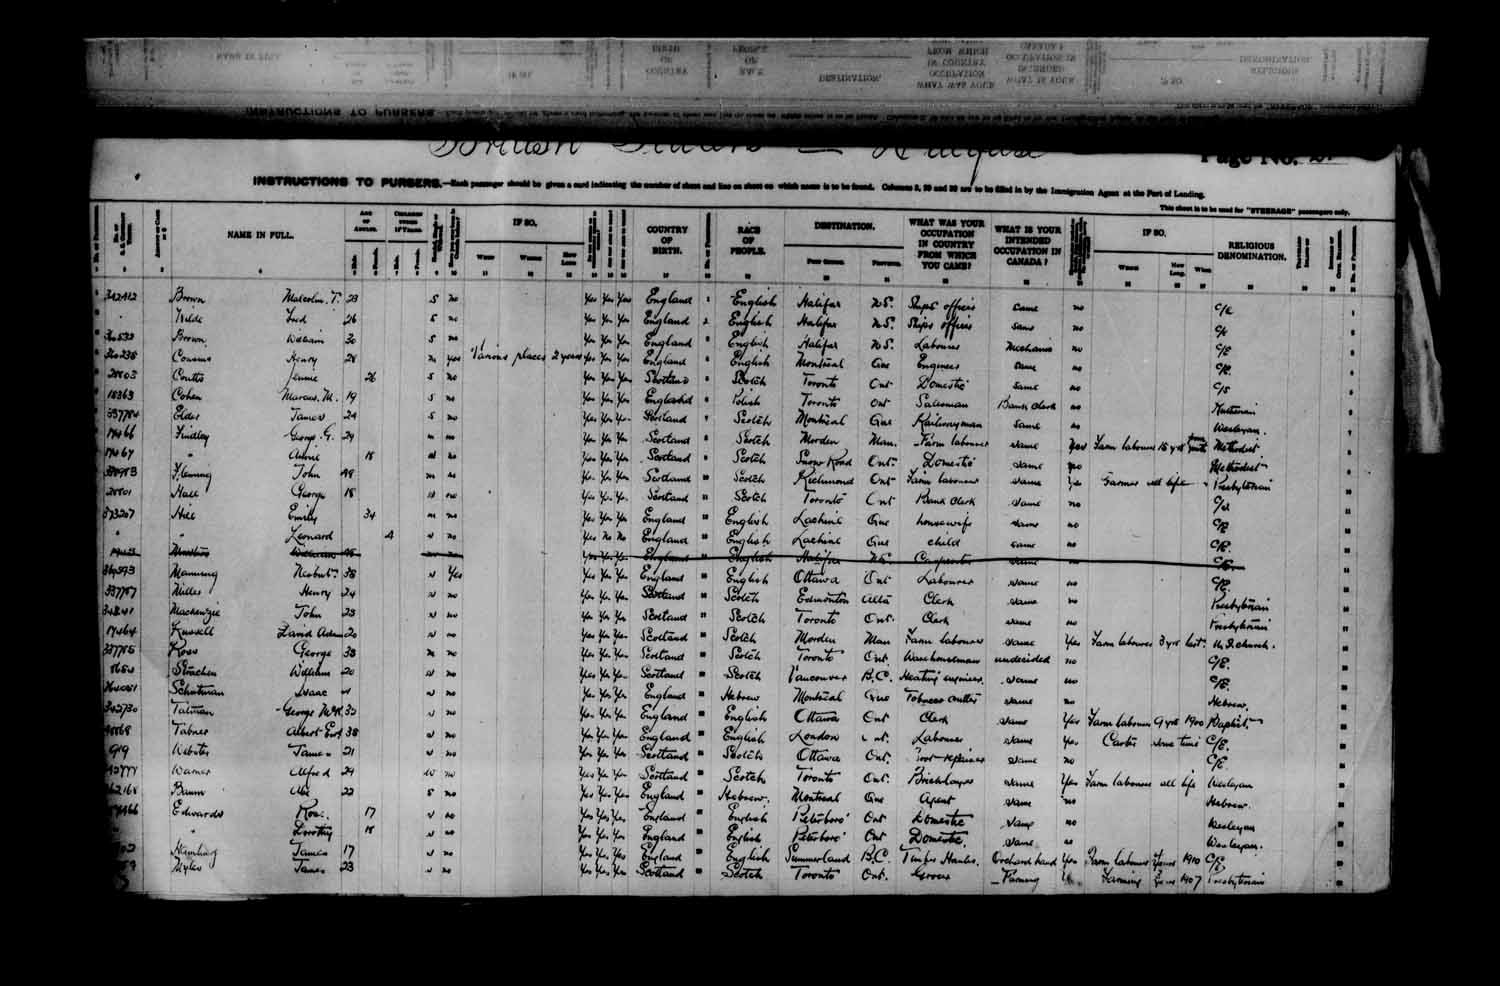 Digitized page of Passenger Lists for Image No.: e003622984